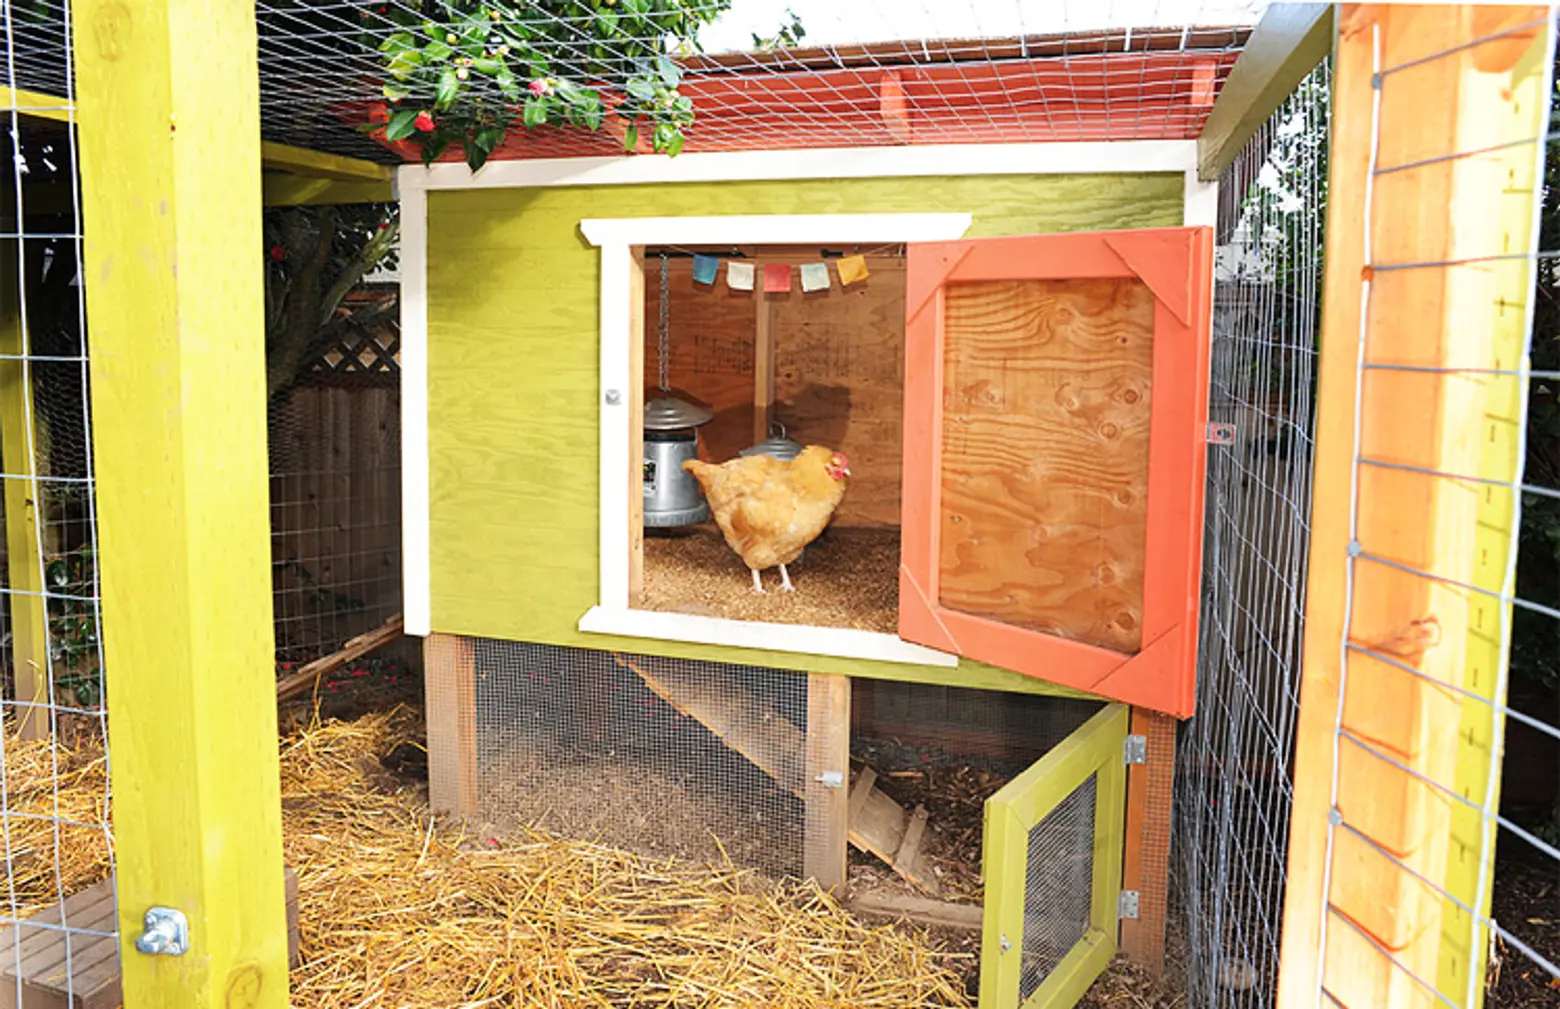 Raising chickens in NYC: Laws, tips, and everything else you need to know